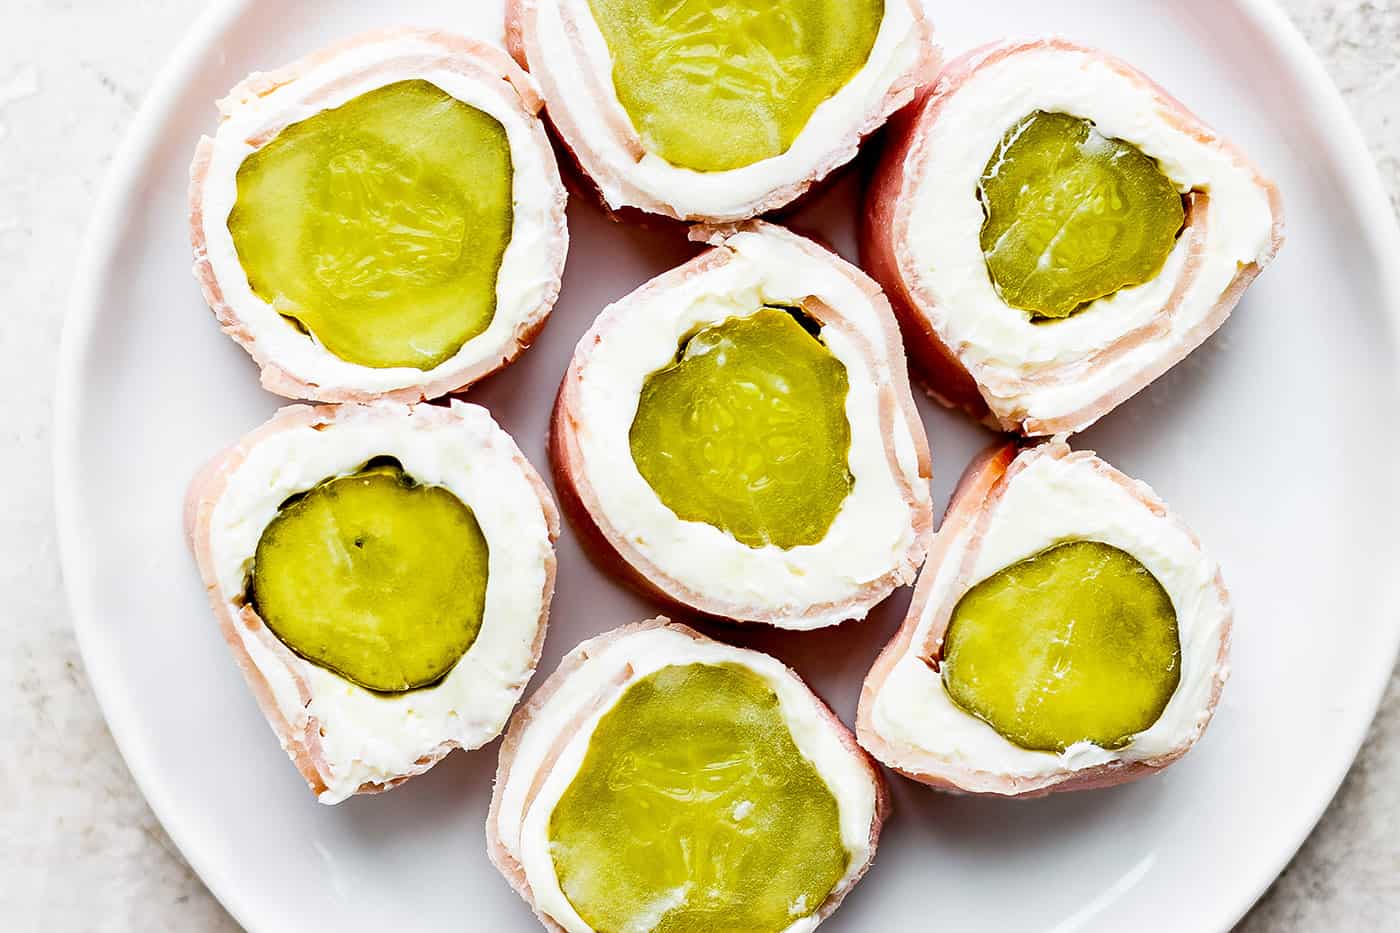 Pickle roll up are shown on a plate.